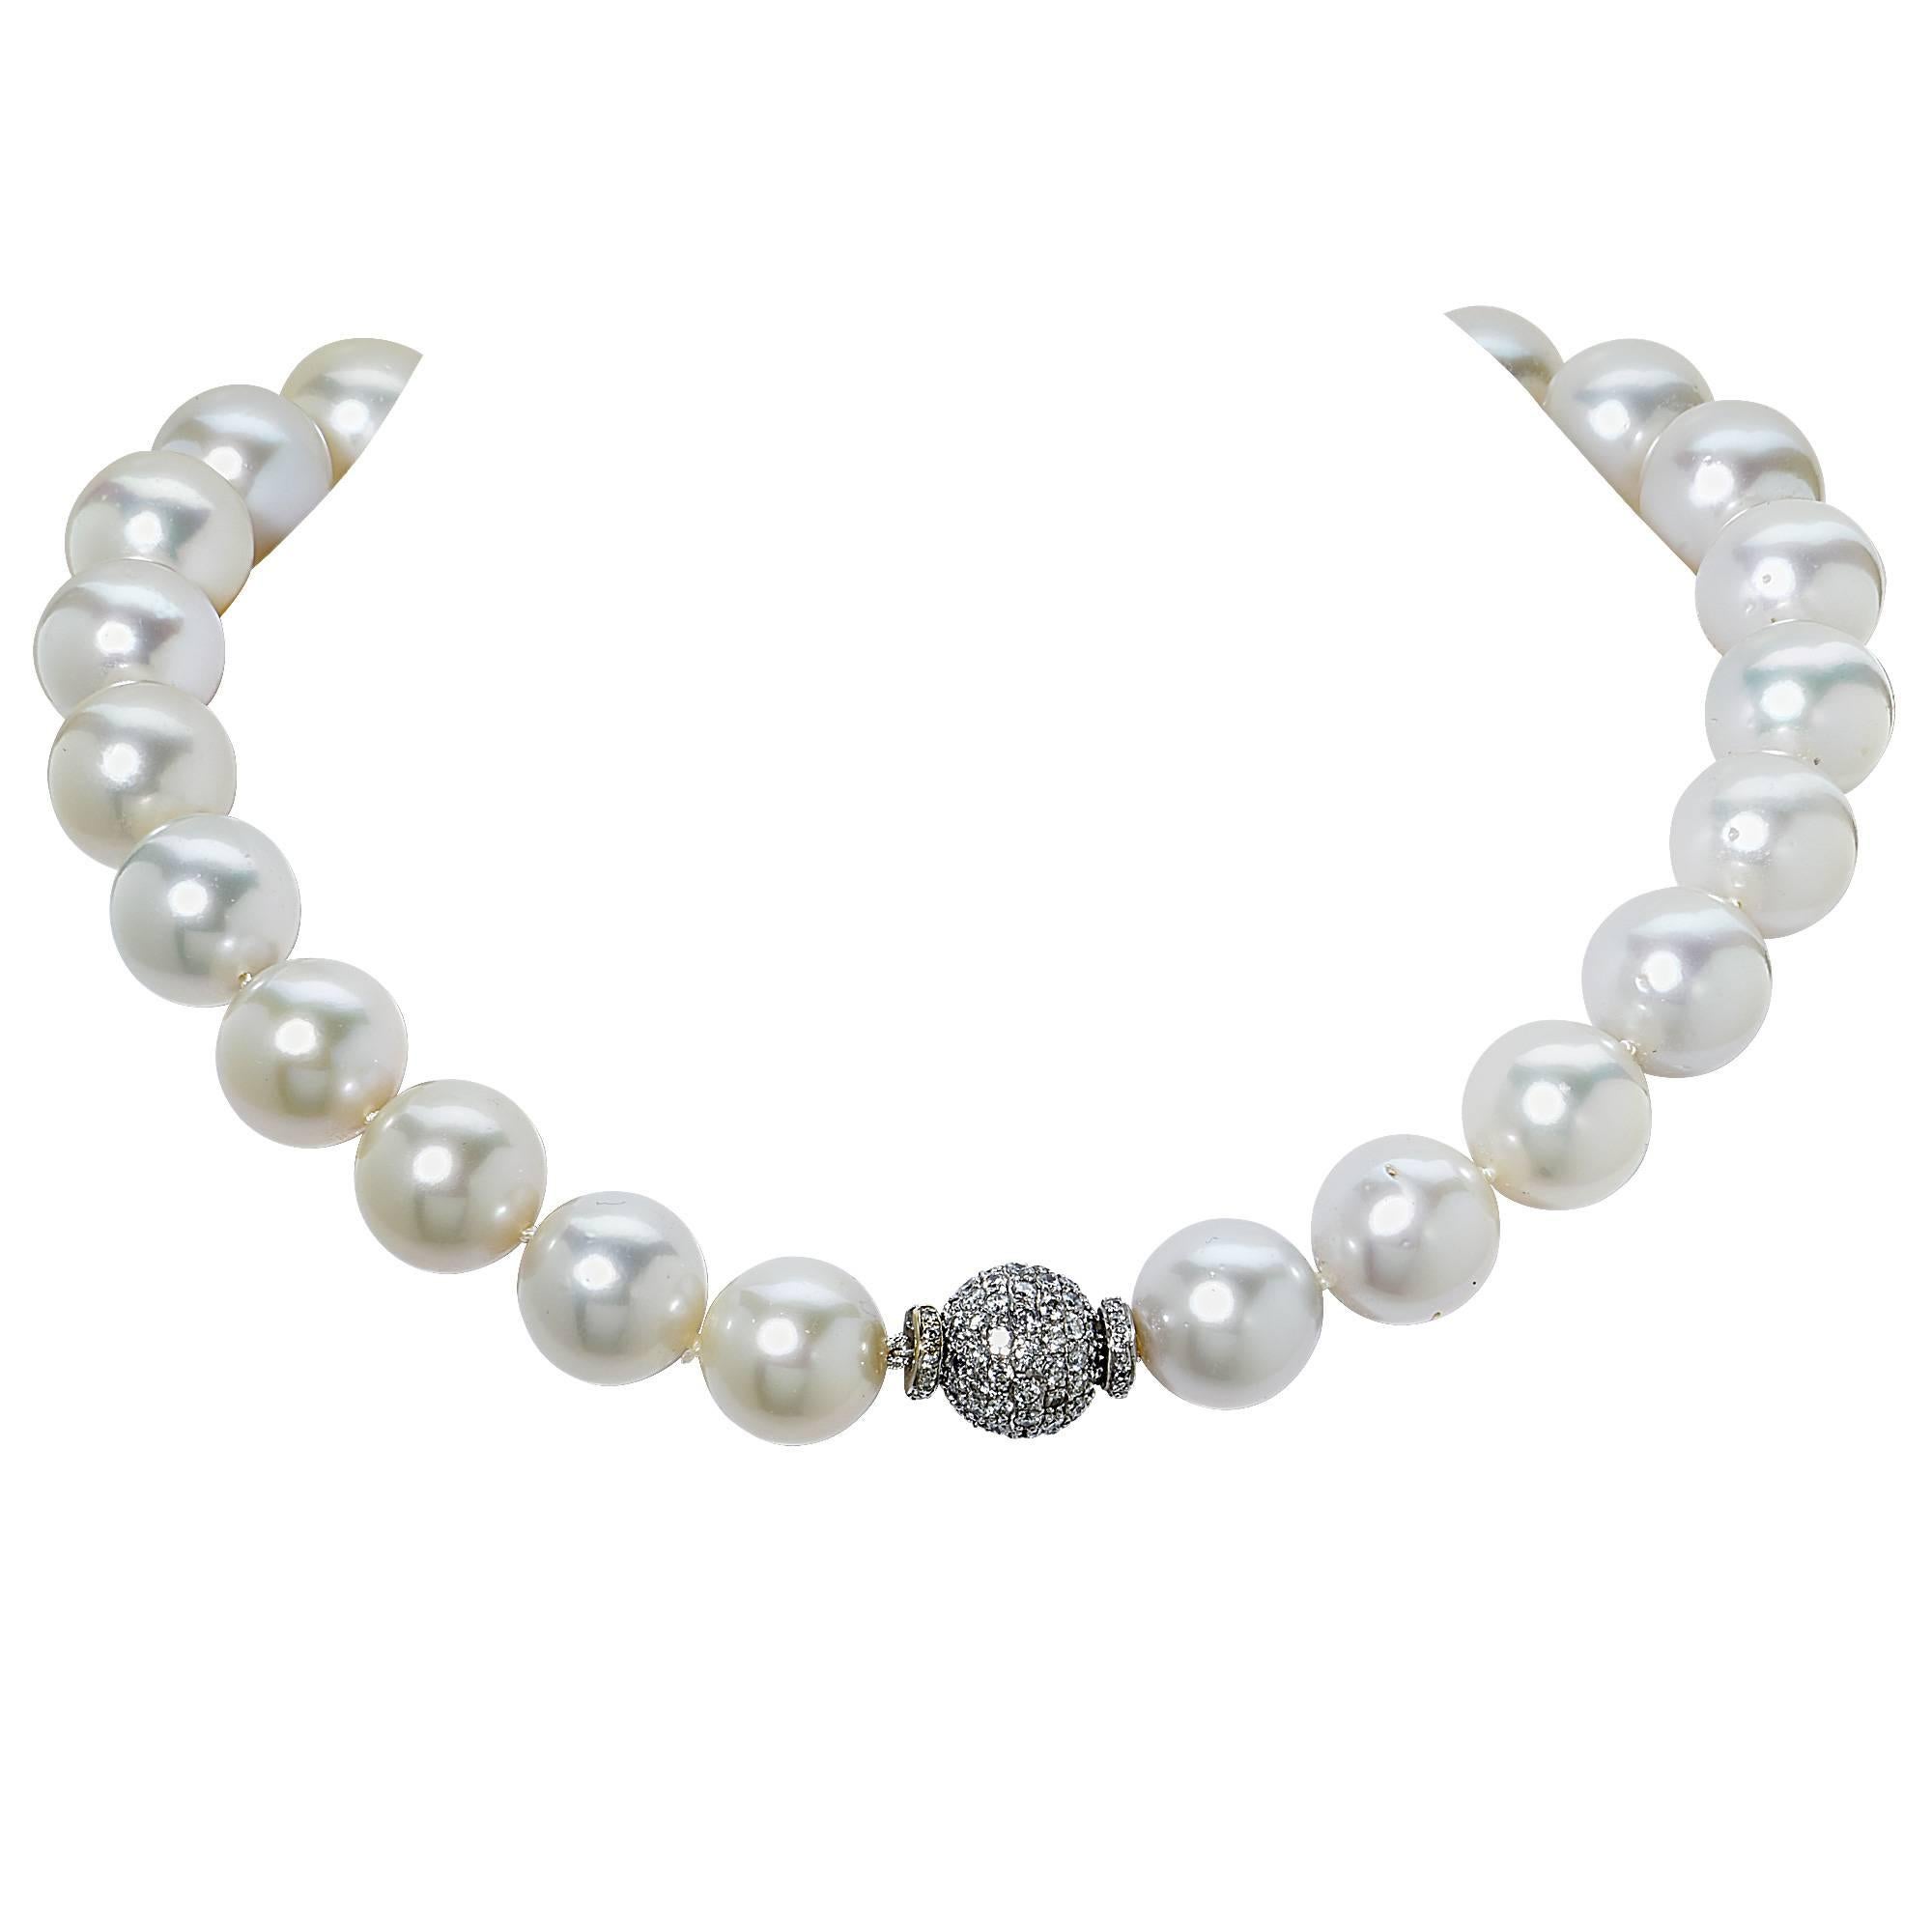 Gorgeous South Sea pearl necklace measuring 17 inches long, containing 25 vibrant white peals with incredible luster. The smallest pearl measures 14mm and the largest pearl 16.2mm. The roundness and quality of the pearls is rated to be AAA. The